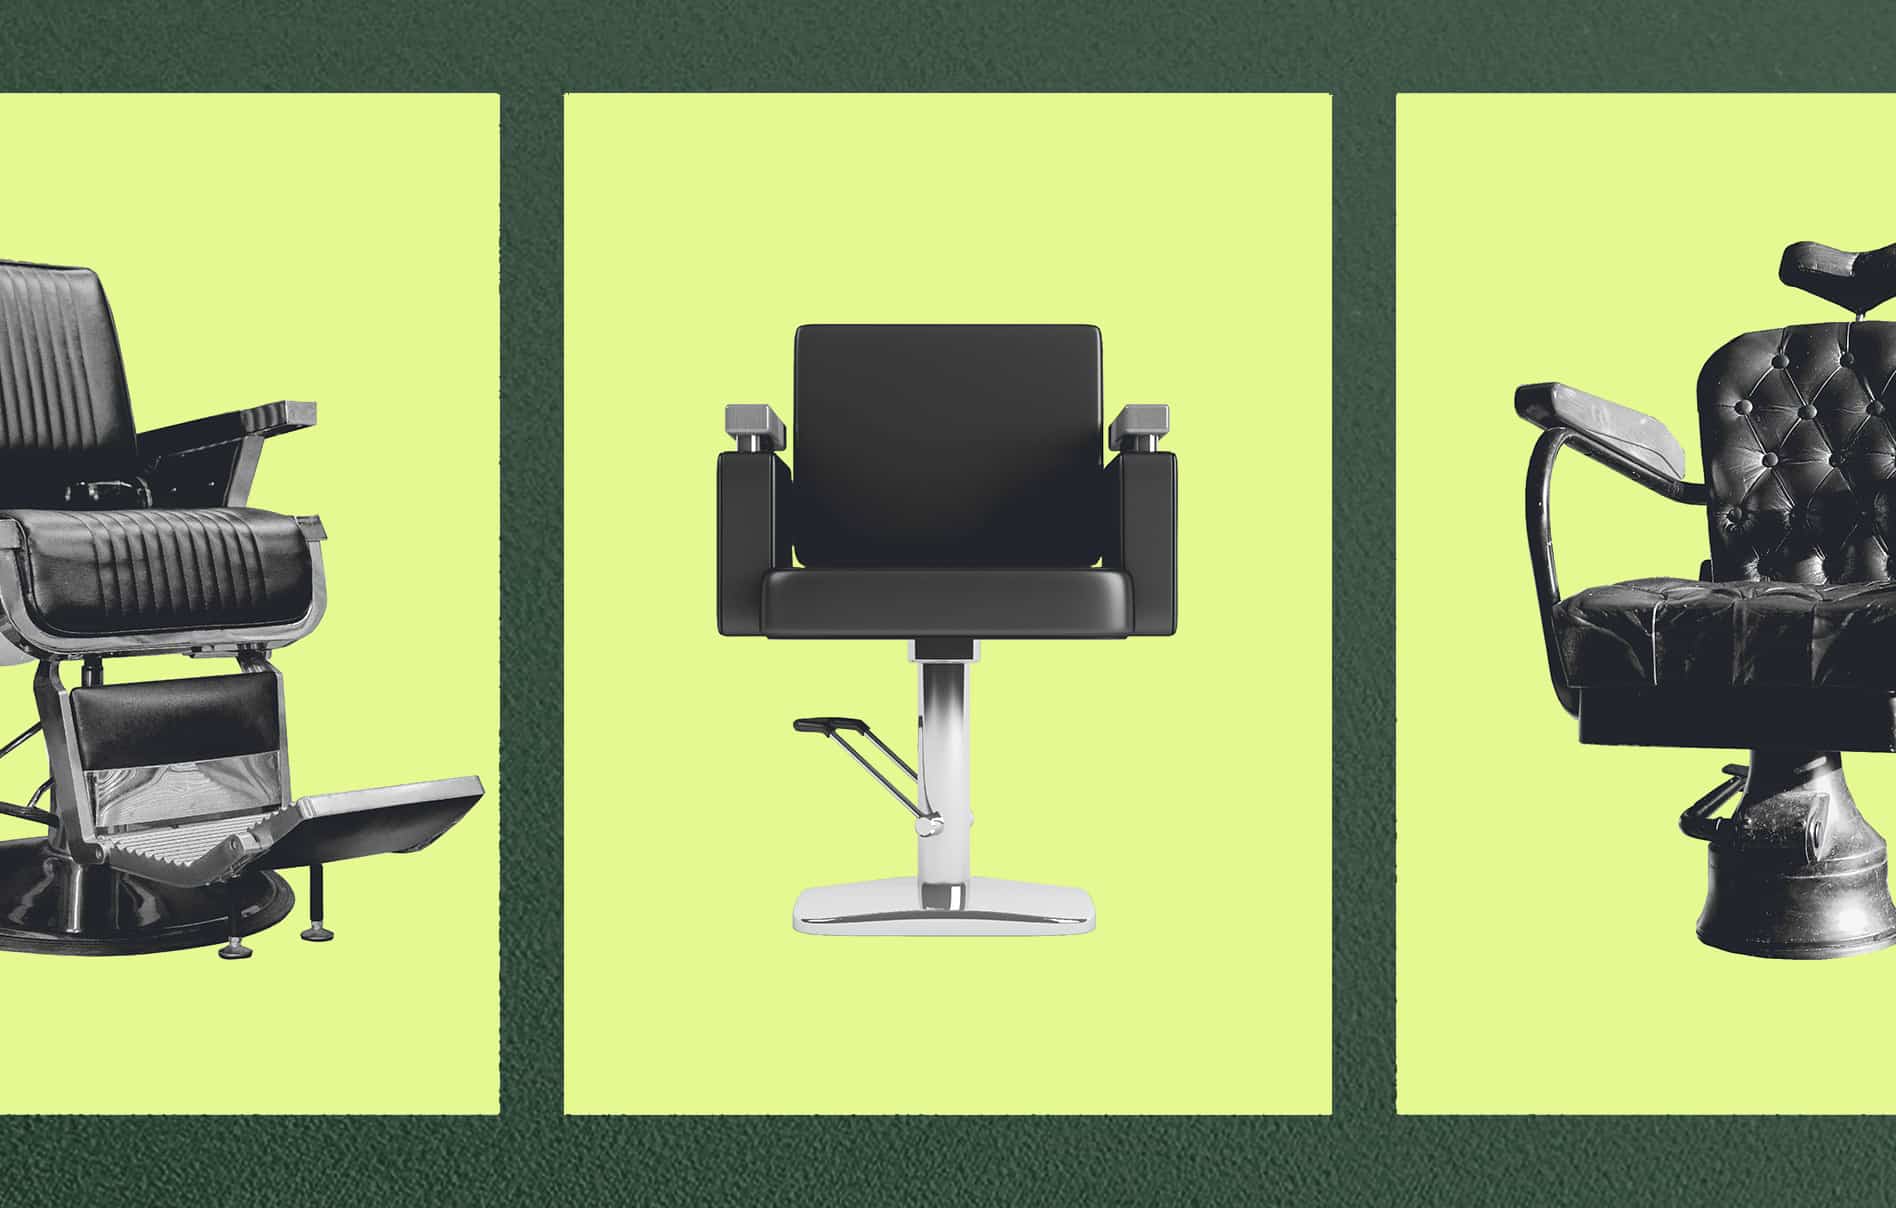 Three different style barber/salon chairs